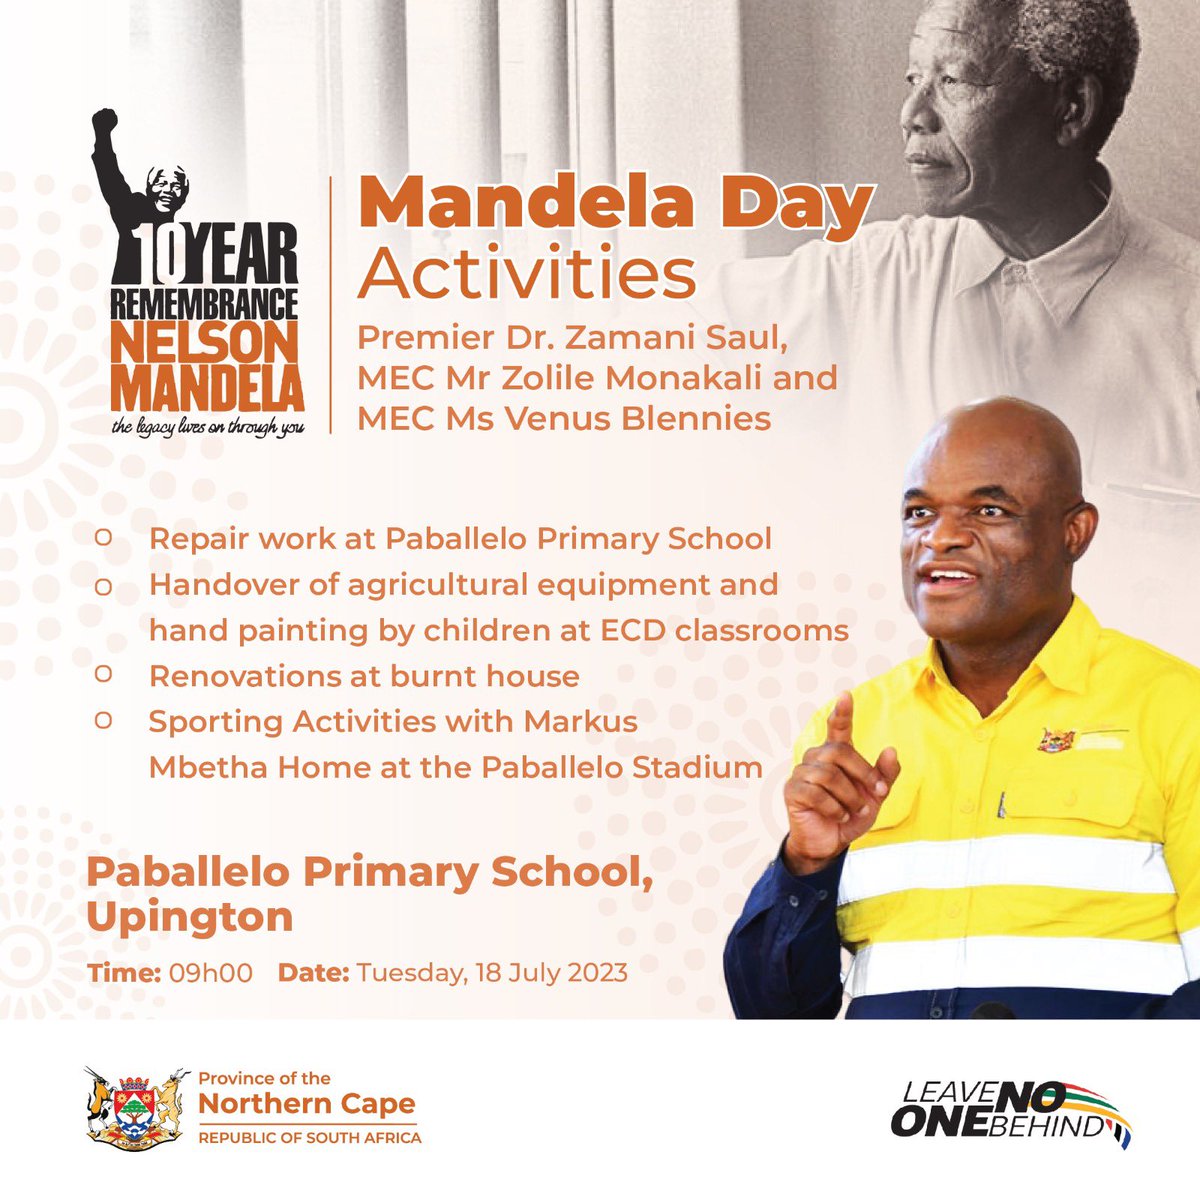 How are you spending your Mandela Day?
#northerncape
#MandelaDay2023 
#mandelamonth 
#MandelaDay